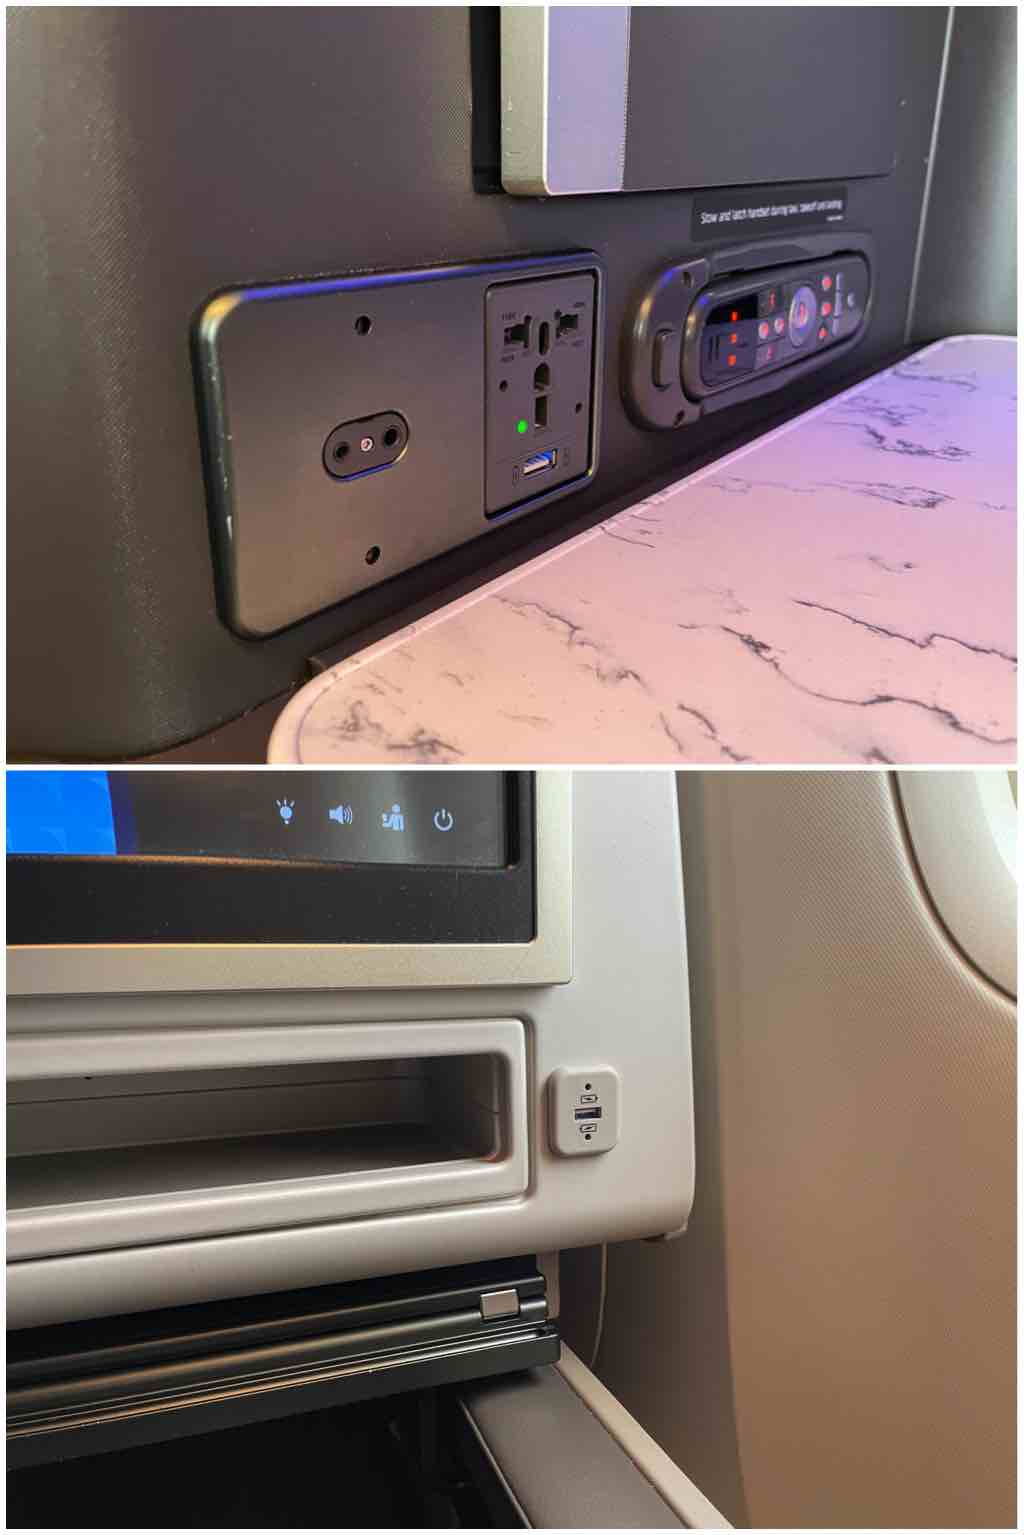 United 777-300er business class seat power ports and plugs